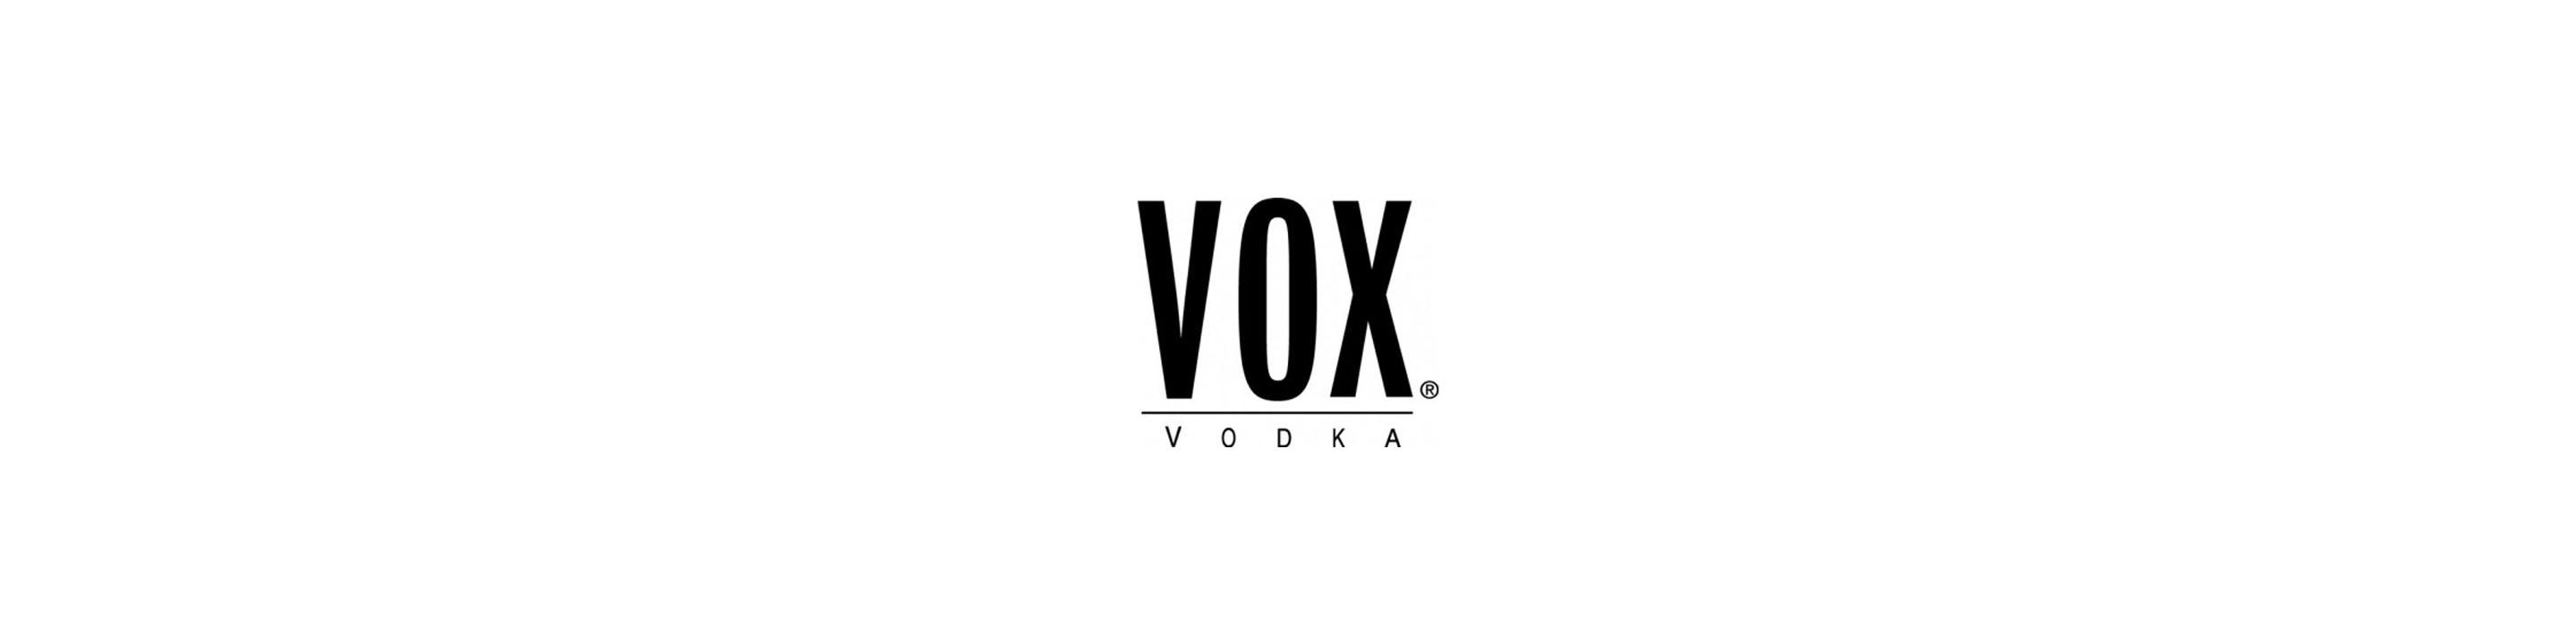 Crafted in the Netherlands from 100% wheat, the mellowest grain for vodka, then meticulously distilled 5 times for exceptional smoothness. VOX comes from a distillery with a 400-year old history of distilling the finest vodka and utilizes the highest-tech method to create the cleanest, freshest vodka available.

Buy Vox online now from nearby liquor stores via Minibar Delivery.